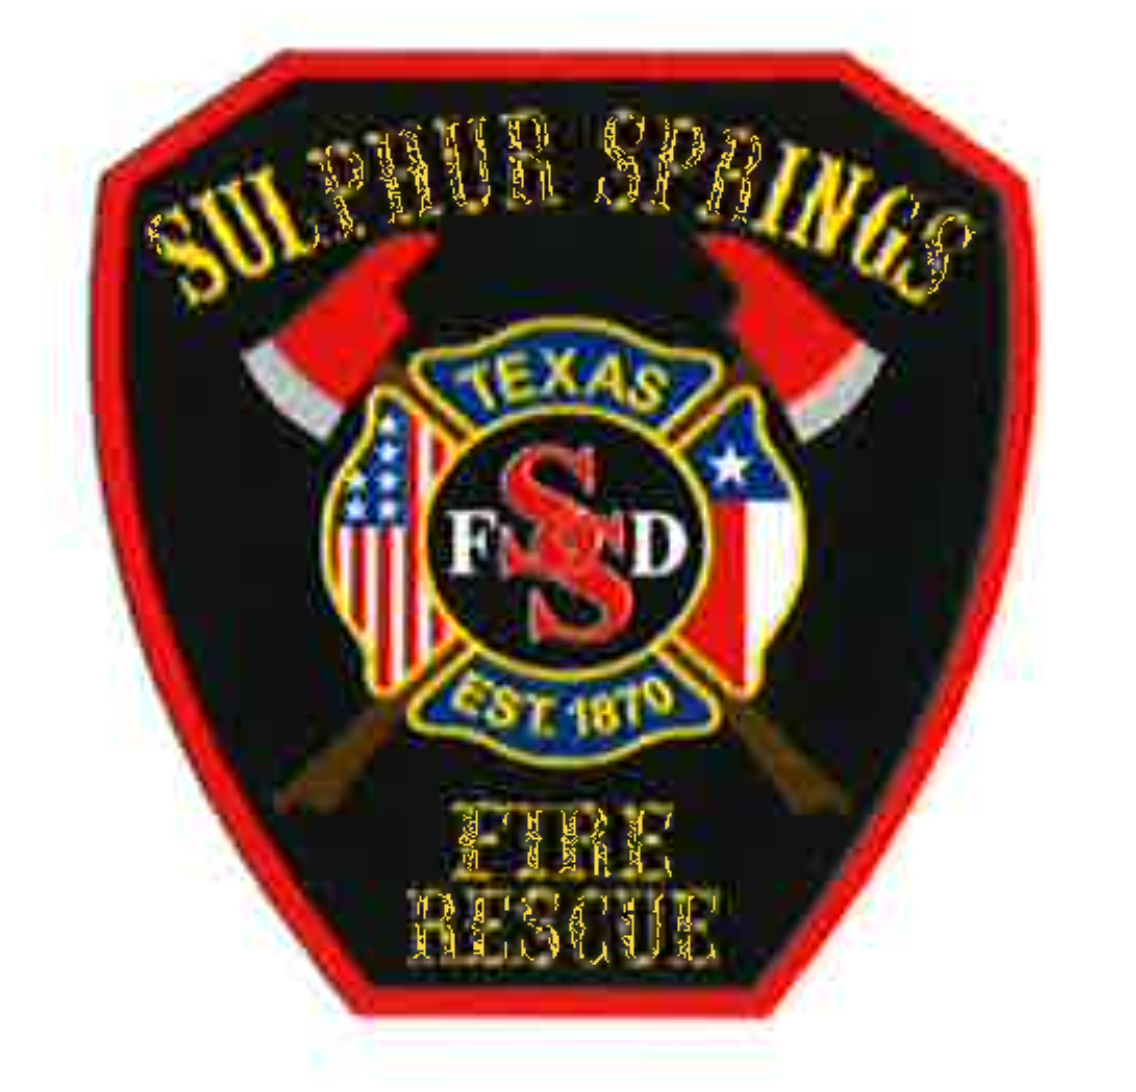 Two children killed in fire on Moore, Sulphur Springs Fire Department says